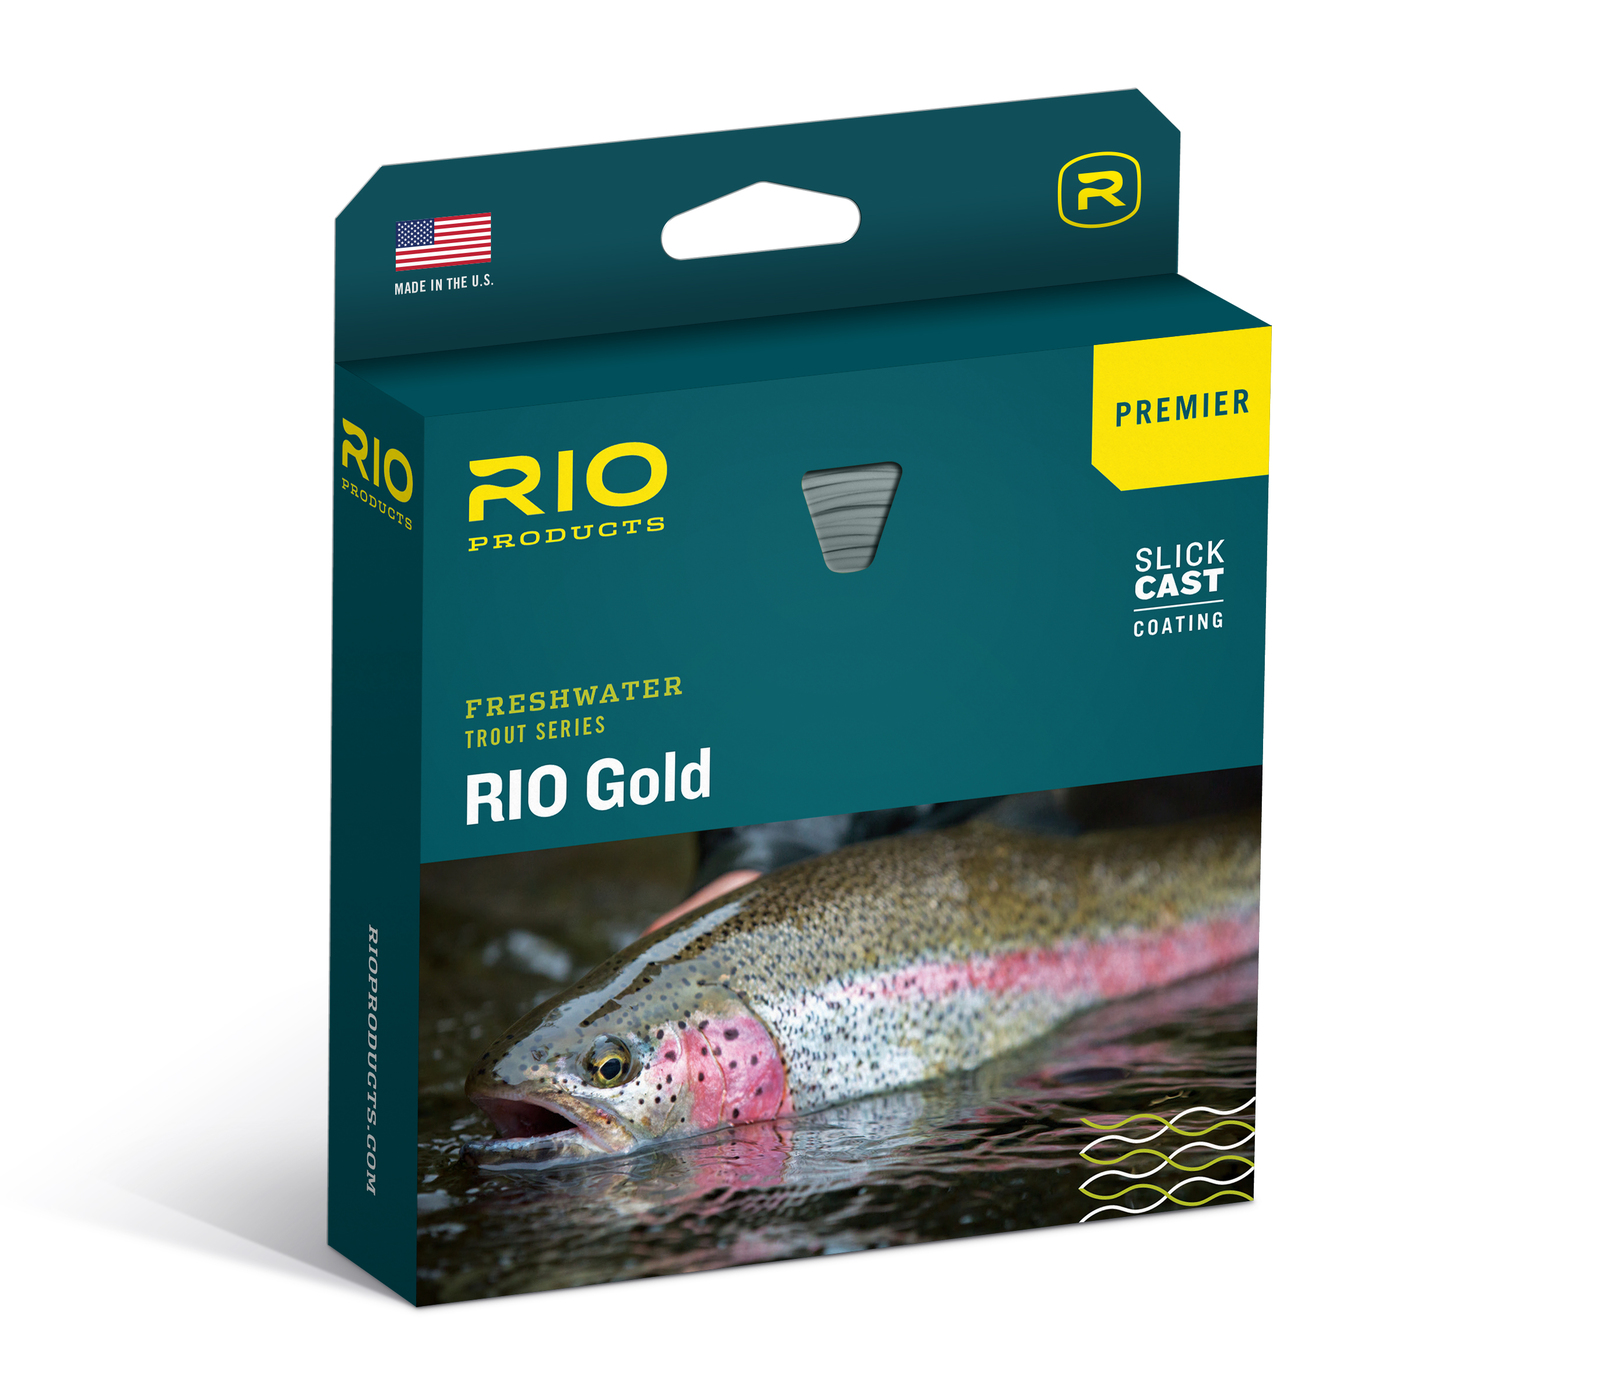 Rio Freshwater Trout Series Premier Rio Gold Fly Line · WF · 8wt · Floating · Moss - Gold